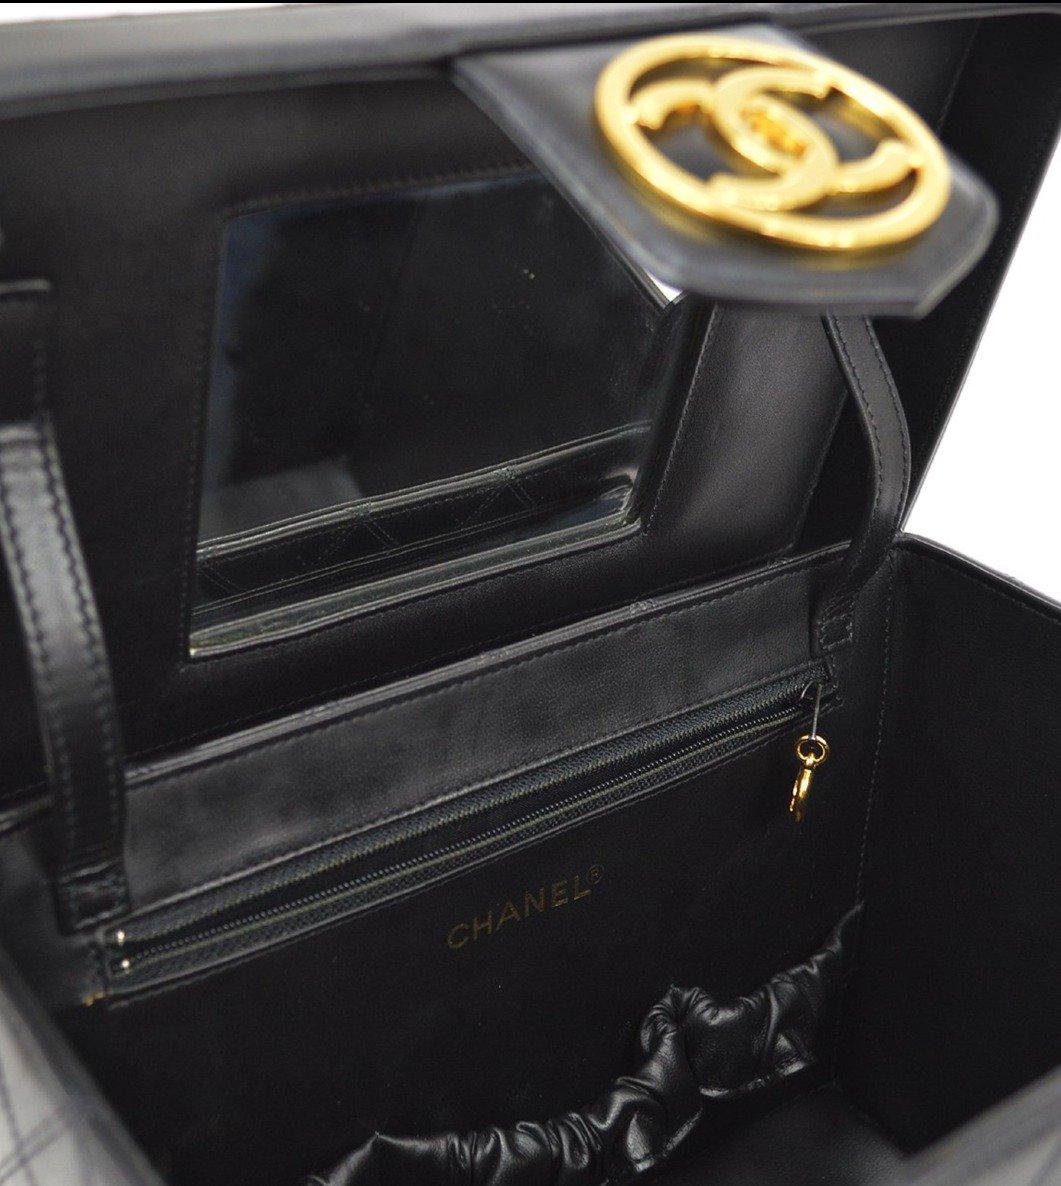 Women's CHANEL CC Black Calfskin Leather Stitch Gold Cosmetic Vanity Top Handle Bag